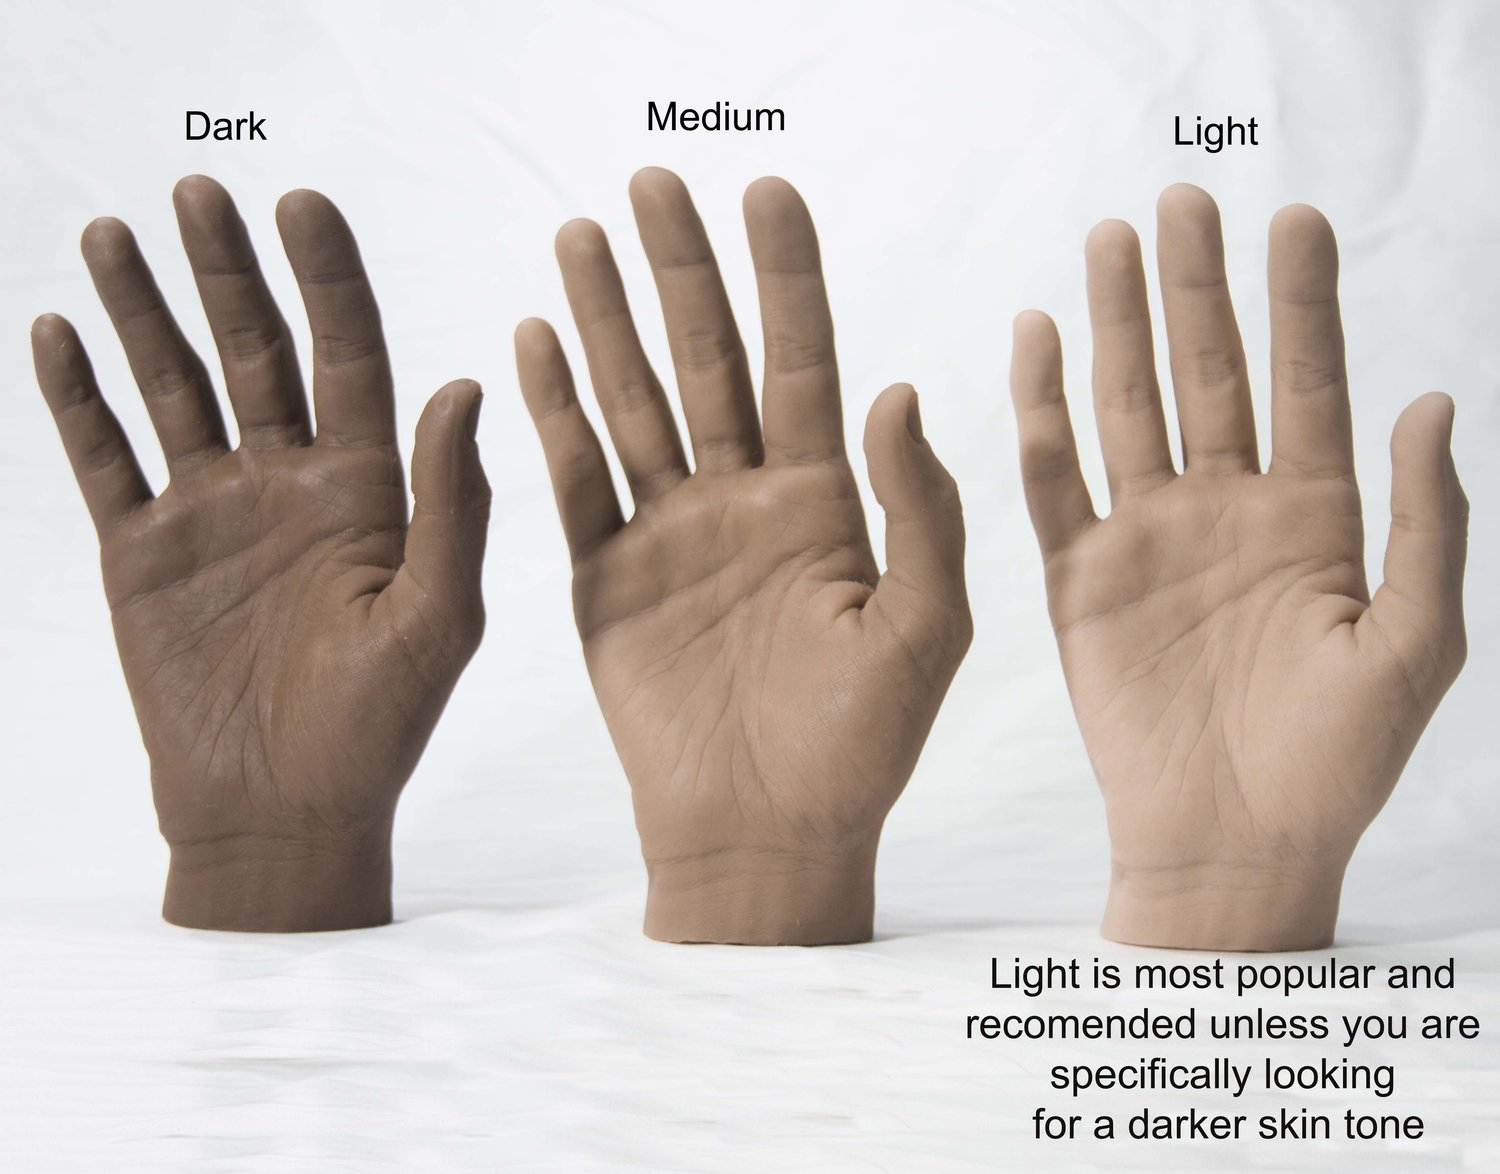 Pose-able Pair of Male Silicone Mannequin Hands - Dark Skin Tone - Display  Model Prop Lifesize — Silicone Sound